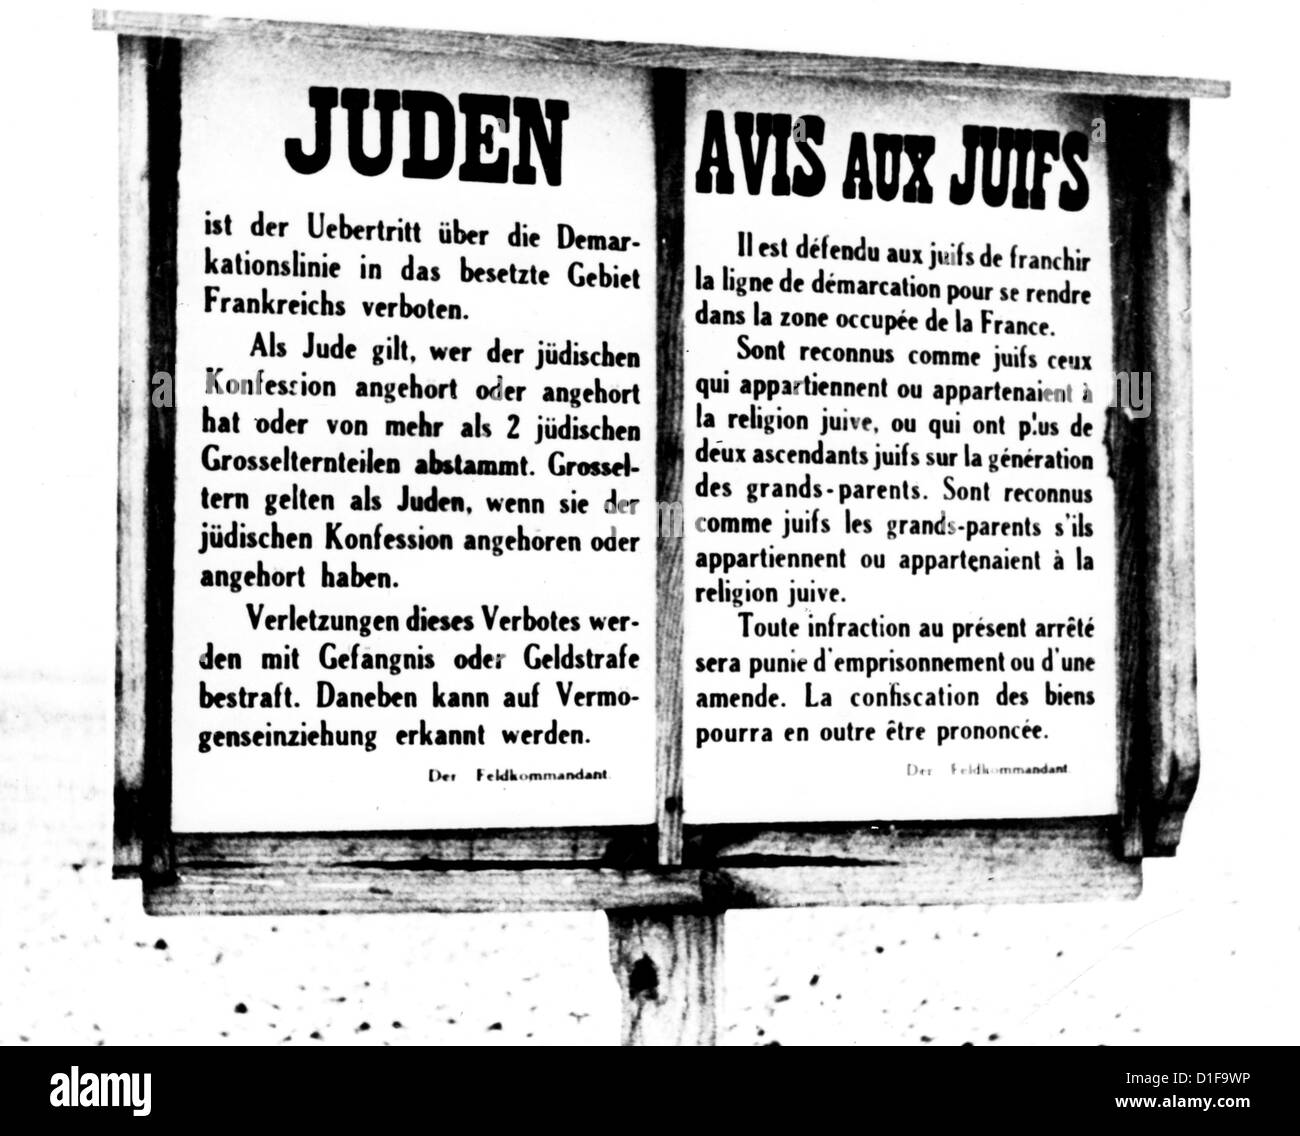 A sign in German and French language declares that Jews are not allowed to corss the demarcation line to enter the zone of occupied France, in March 1941. Fotoarchiv für Zeitgeschichte Stock Photo